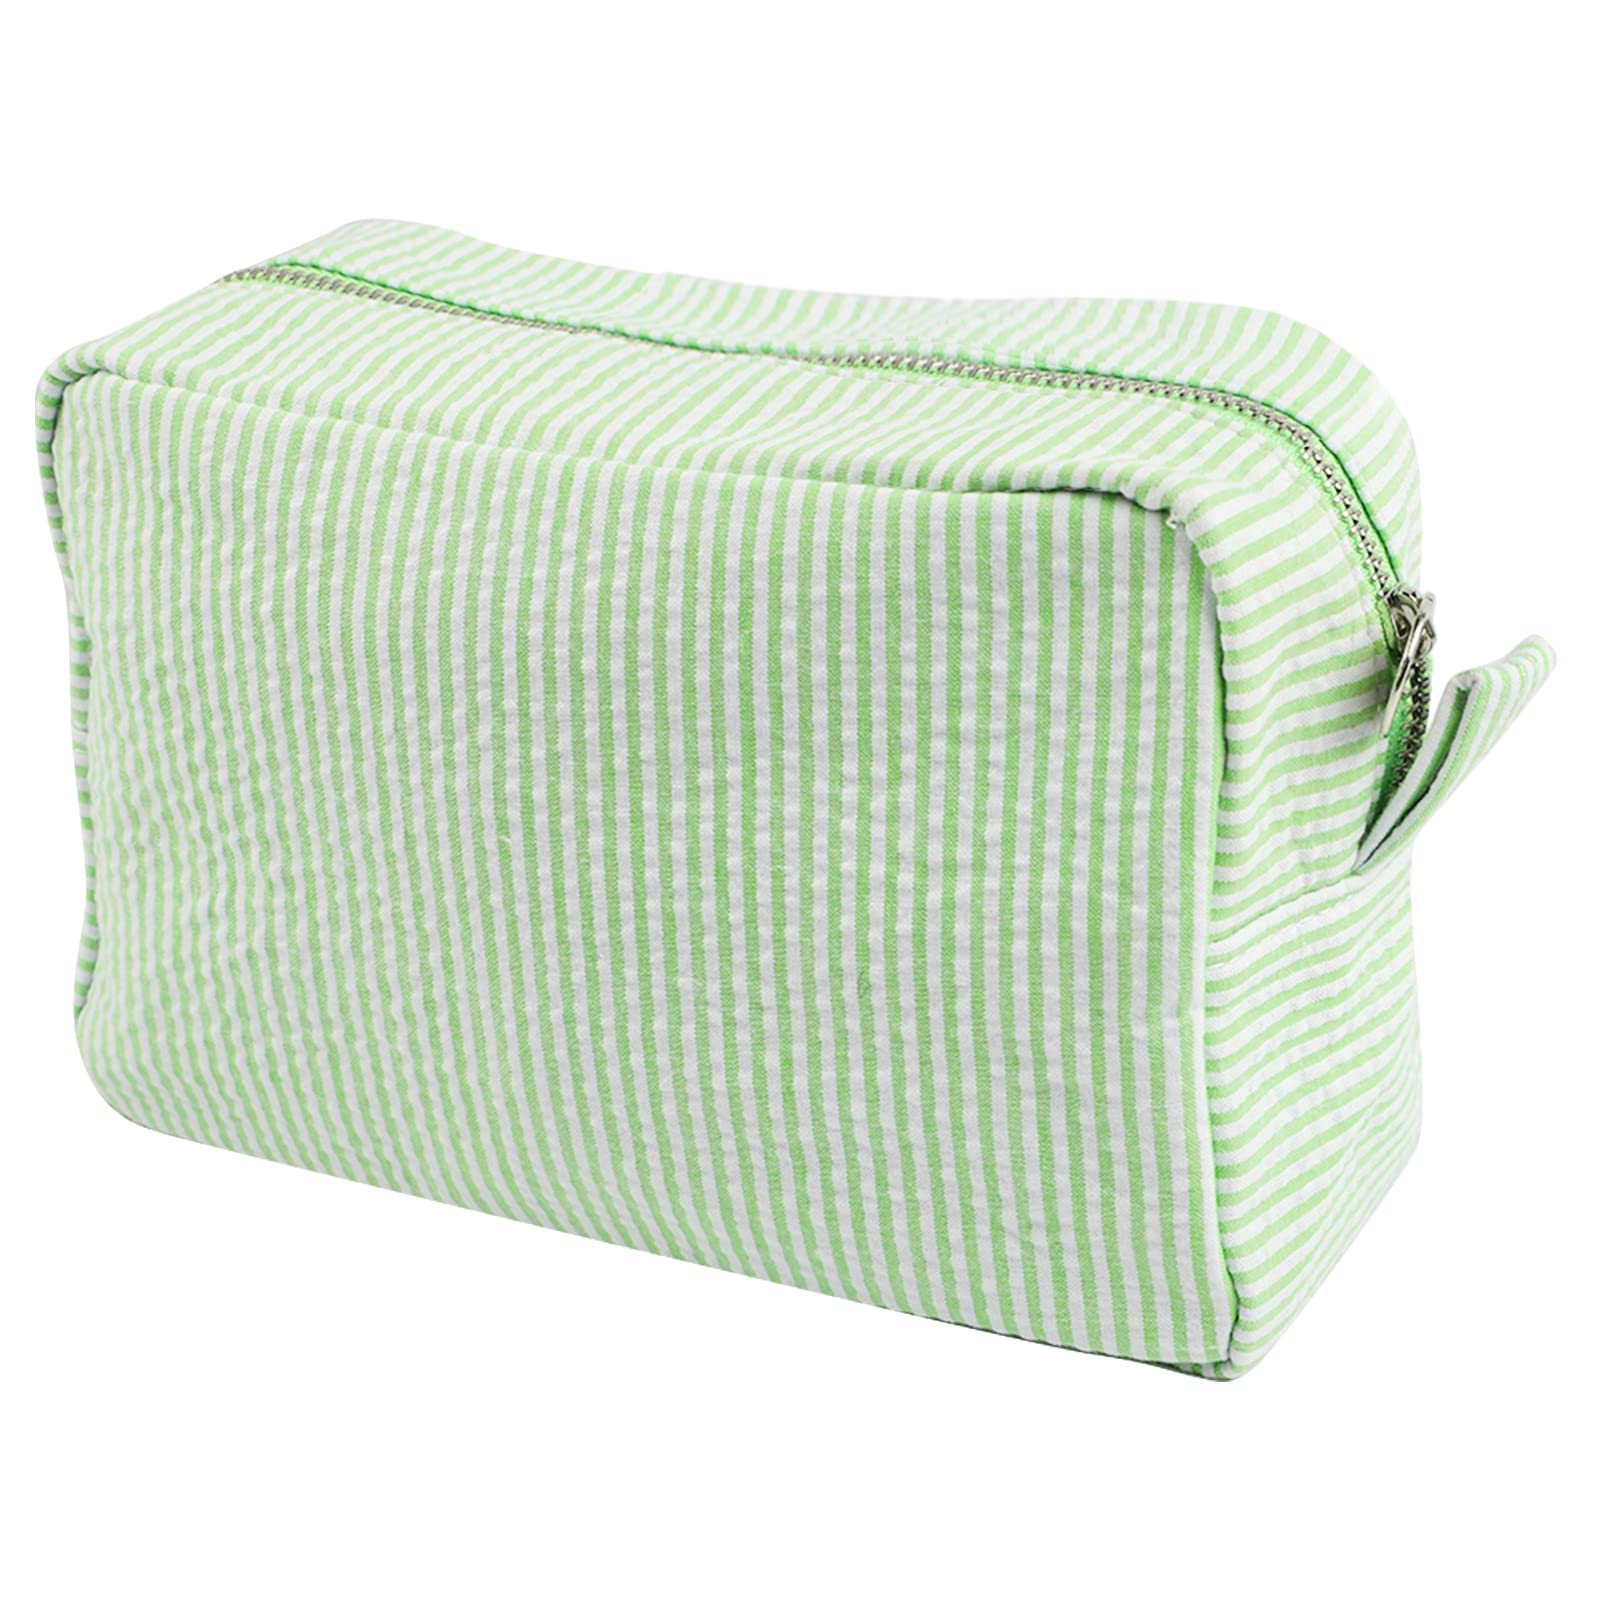 Cosmetic Pouch Set In Citron - Green Makeup Organizer Bags & Travel Case